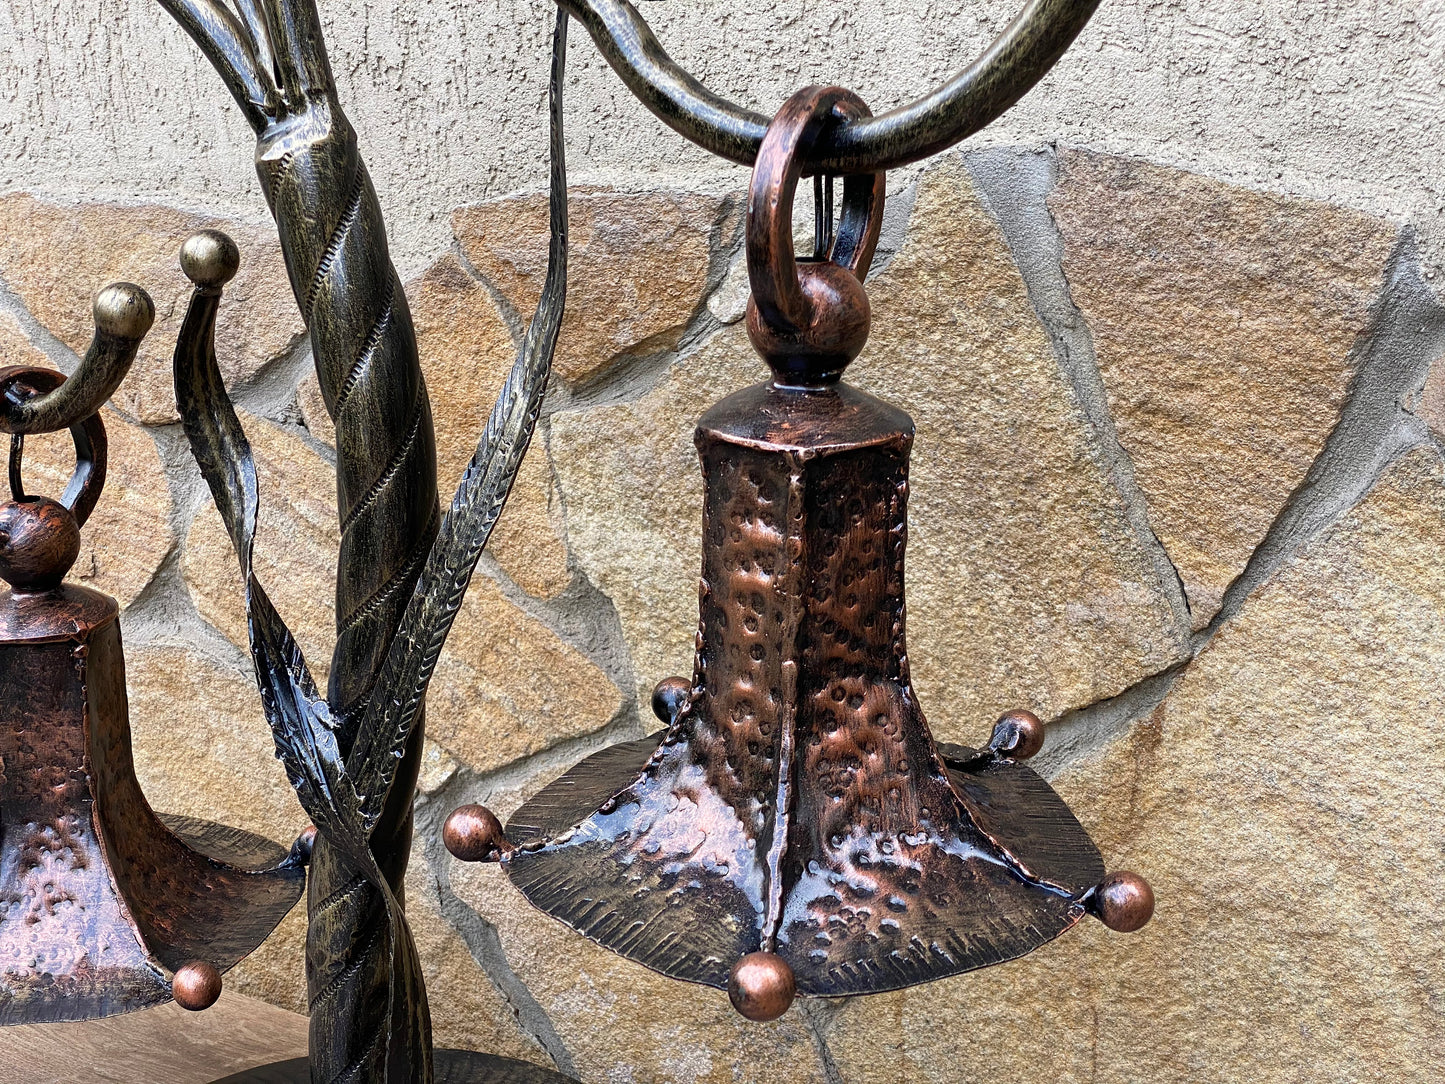 Fairy lamp, table lamp, night lamp, hand forged lamp, fairy light, anniversary gift, iron gift, bell, Christmas gift, wall sconce, wreath